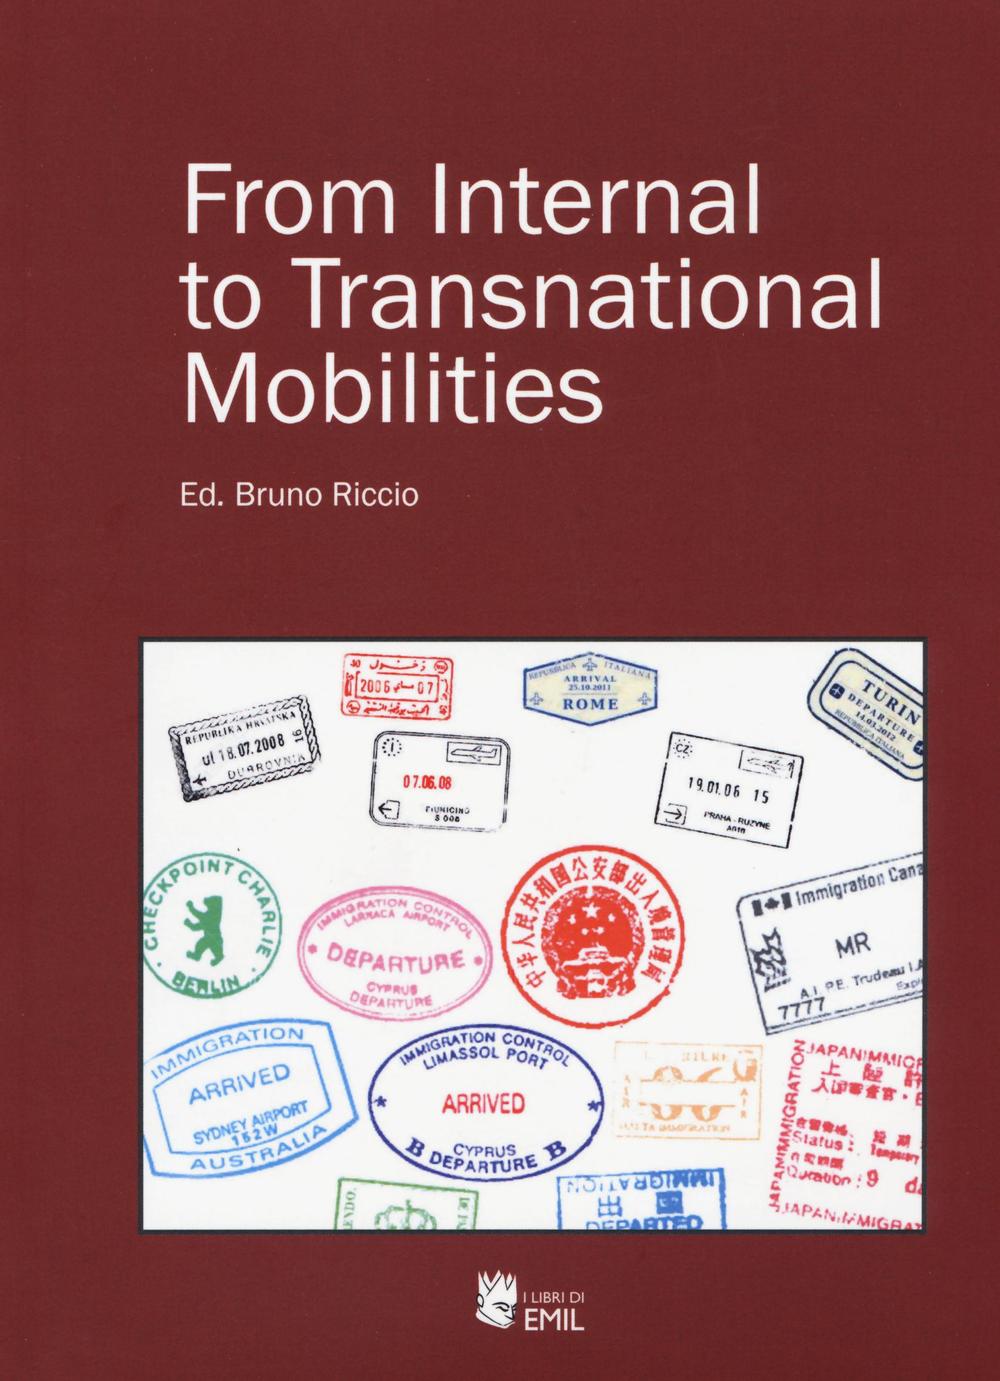 From internal to transnational mobilities